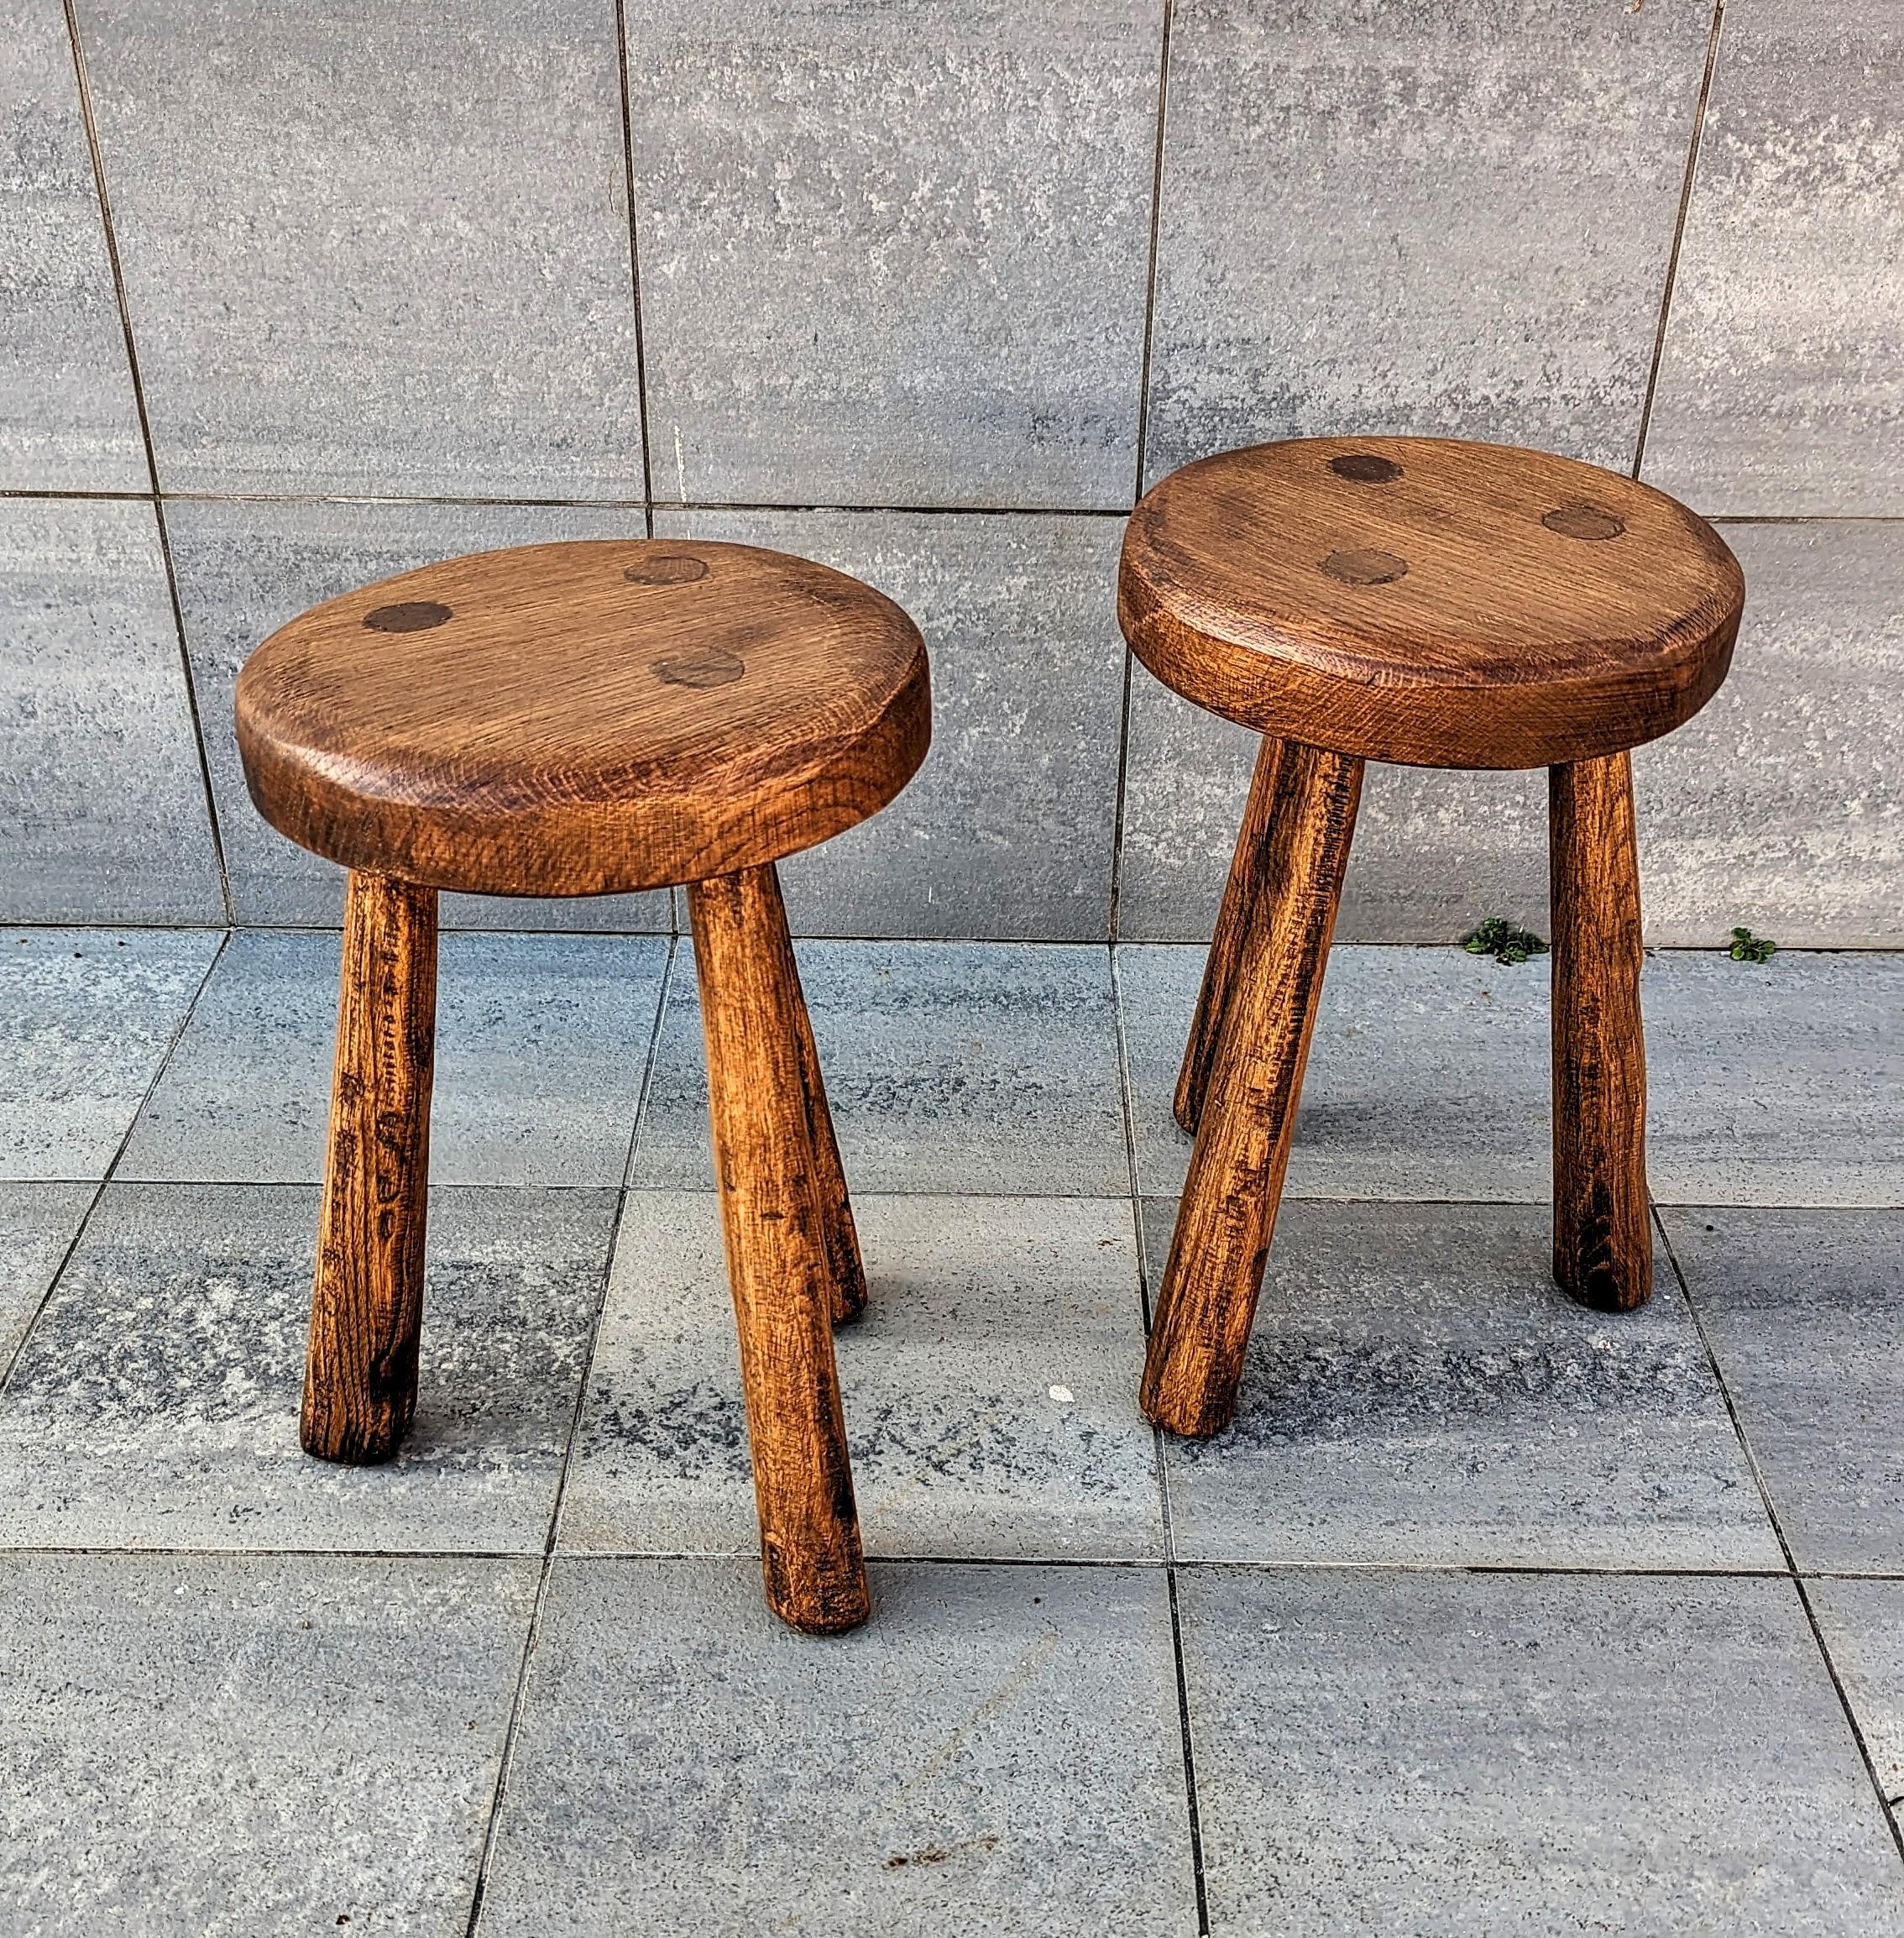 Rare and beautiful pair of handmade wooden stool, manufactured in France in 1970s. Incredible handmade of quality, with solid wood. Very rare and cool to have a pair.